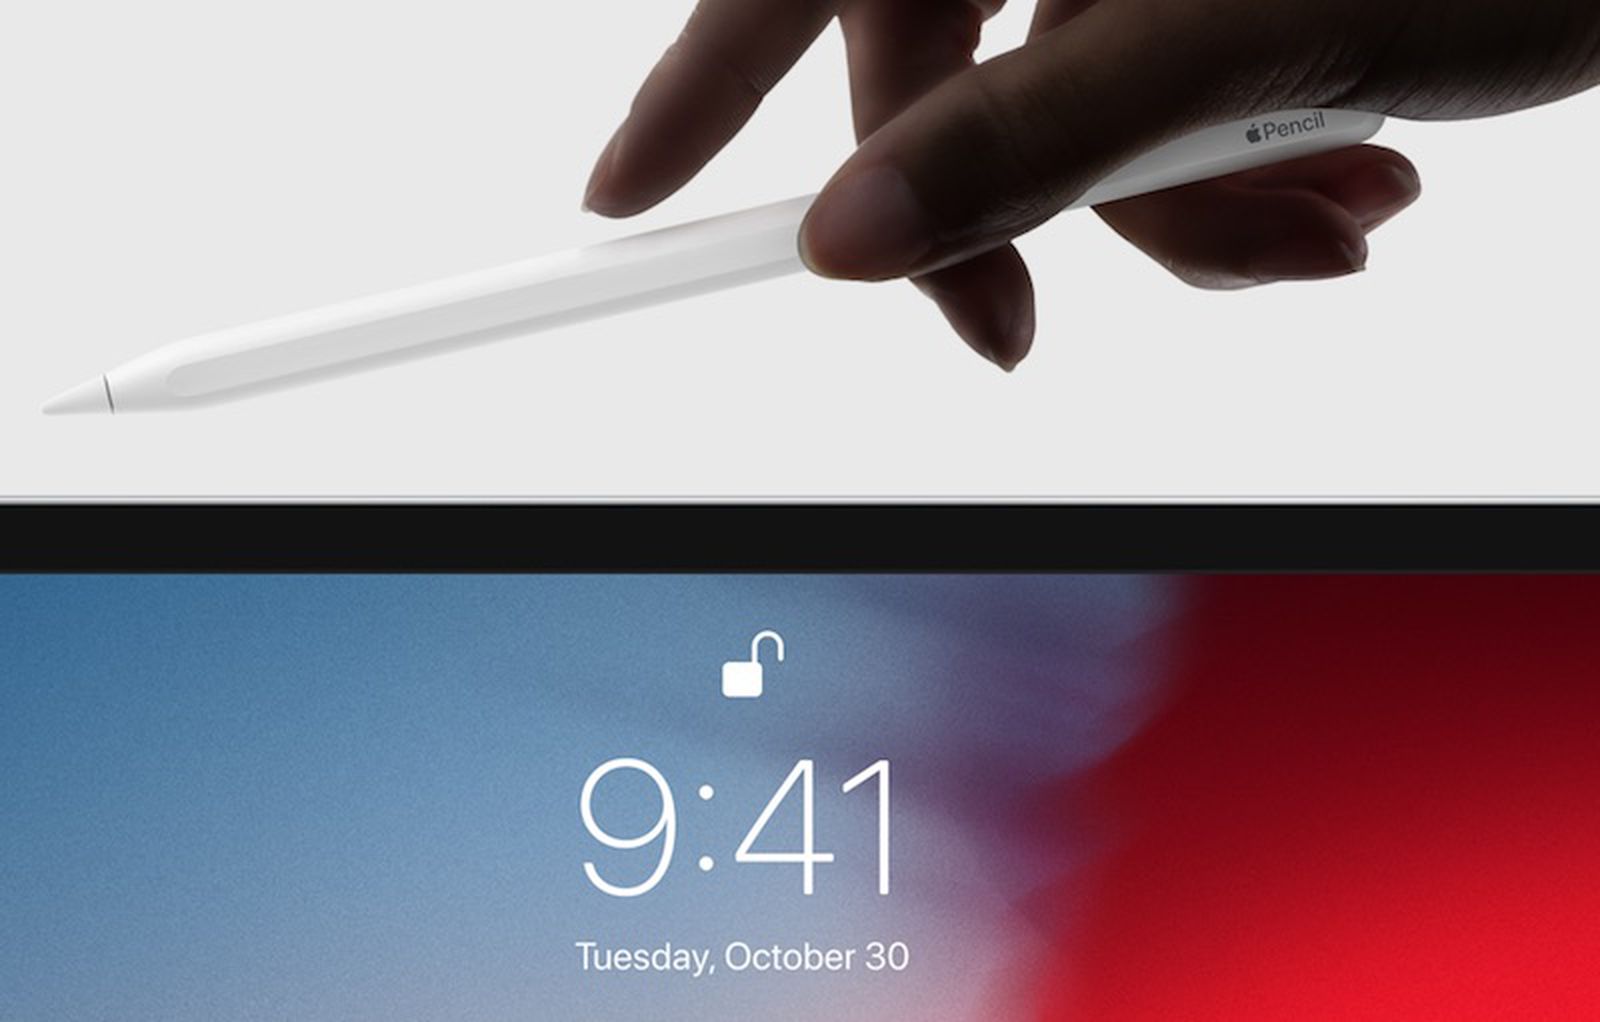 Three Things to Know About the New Apple Pencil - MacRumors